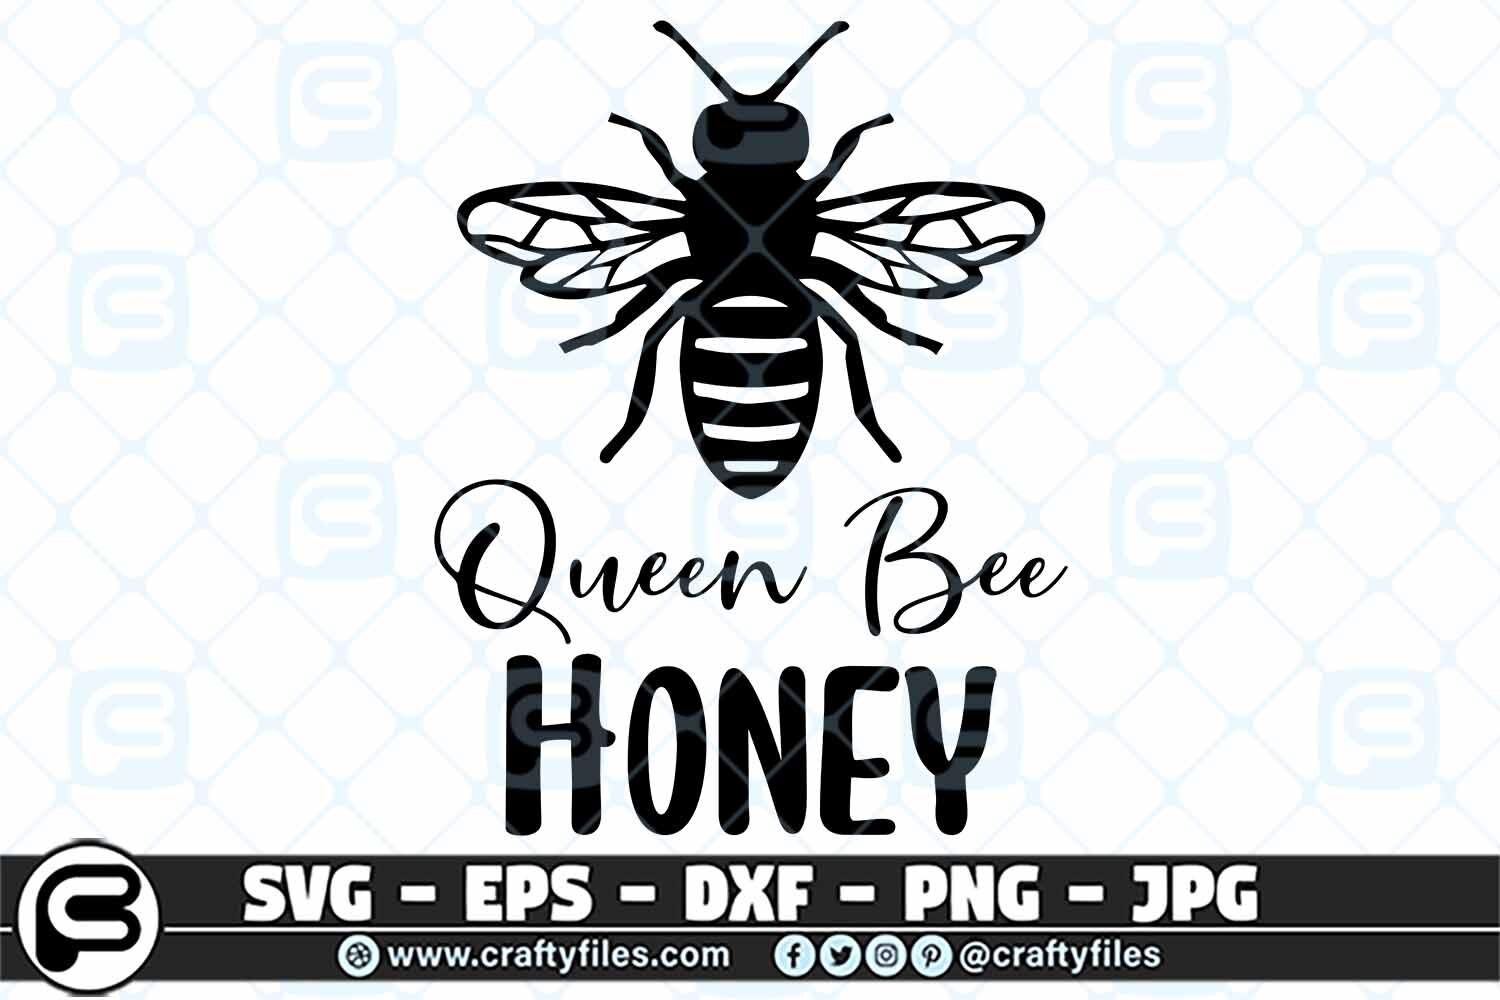 Download Queen Bee Honey Svg Cut File Bee Svg Honey Svg By Crafty Files Thehungryjpeg Com